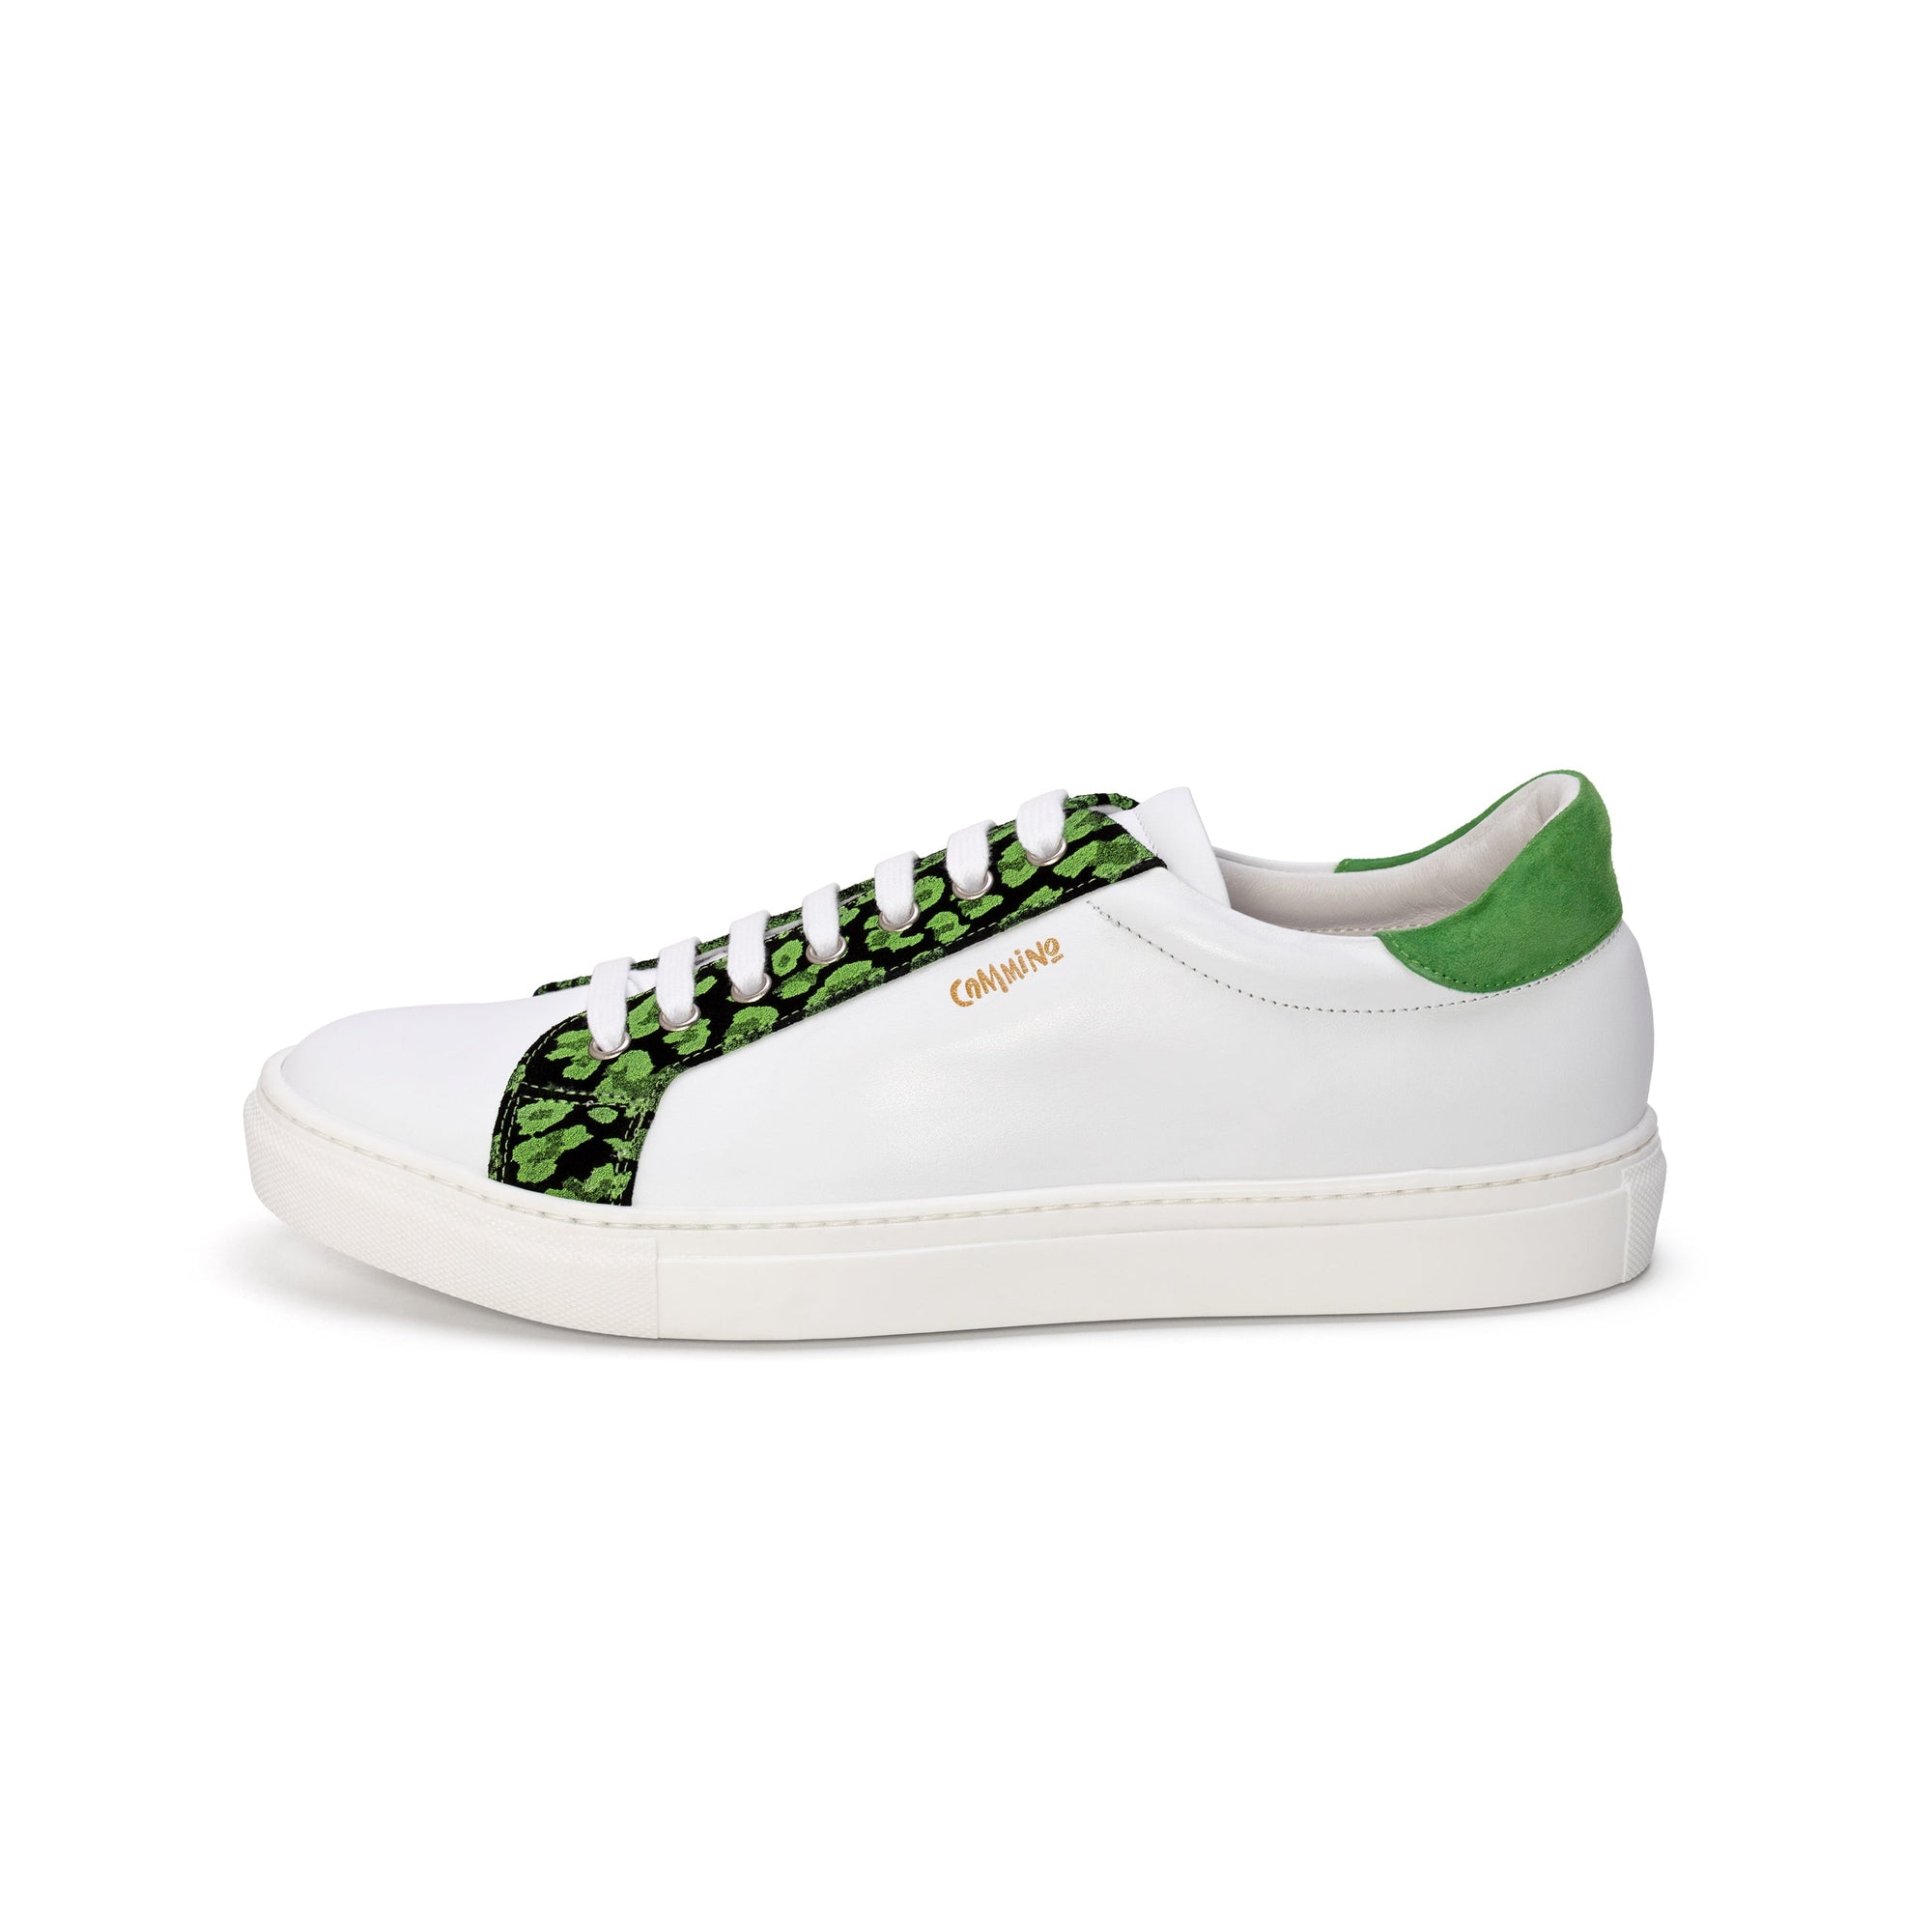 Avonde - white and green sneaker Sneakers Cammino Shoes 